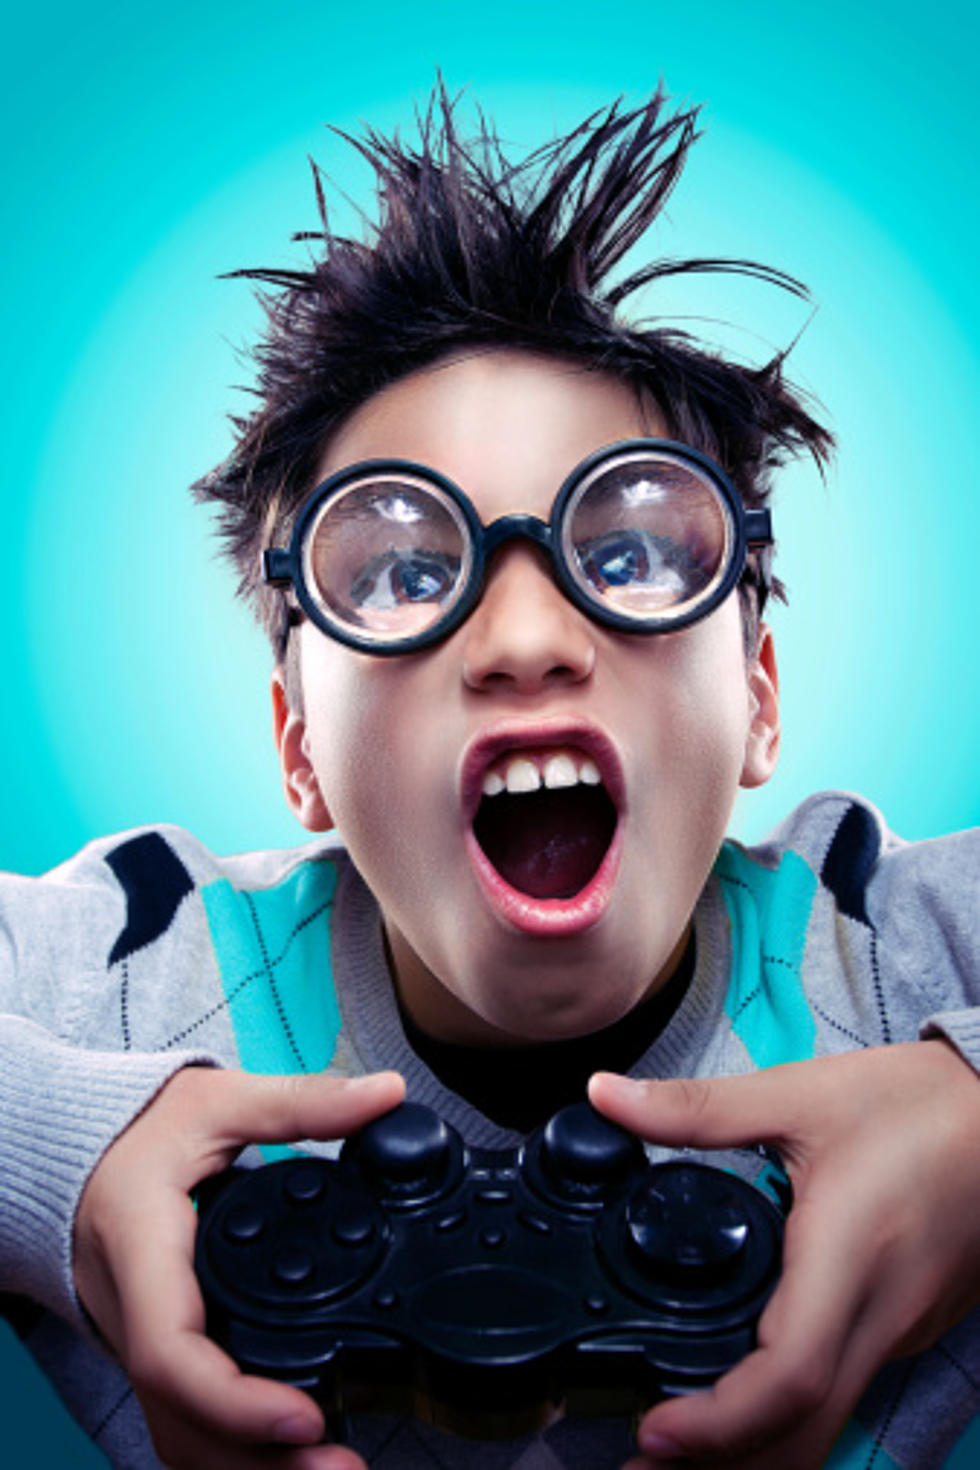 Play Video Games While Getting Your Hair Cut- Say “What!?”